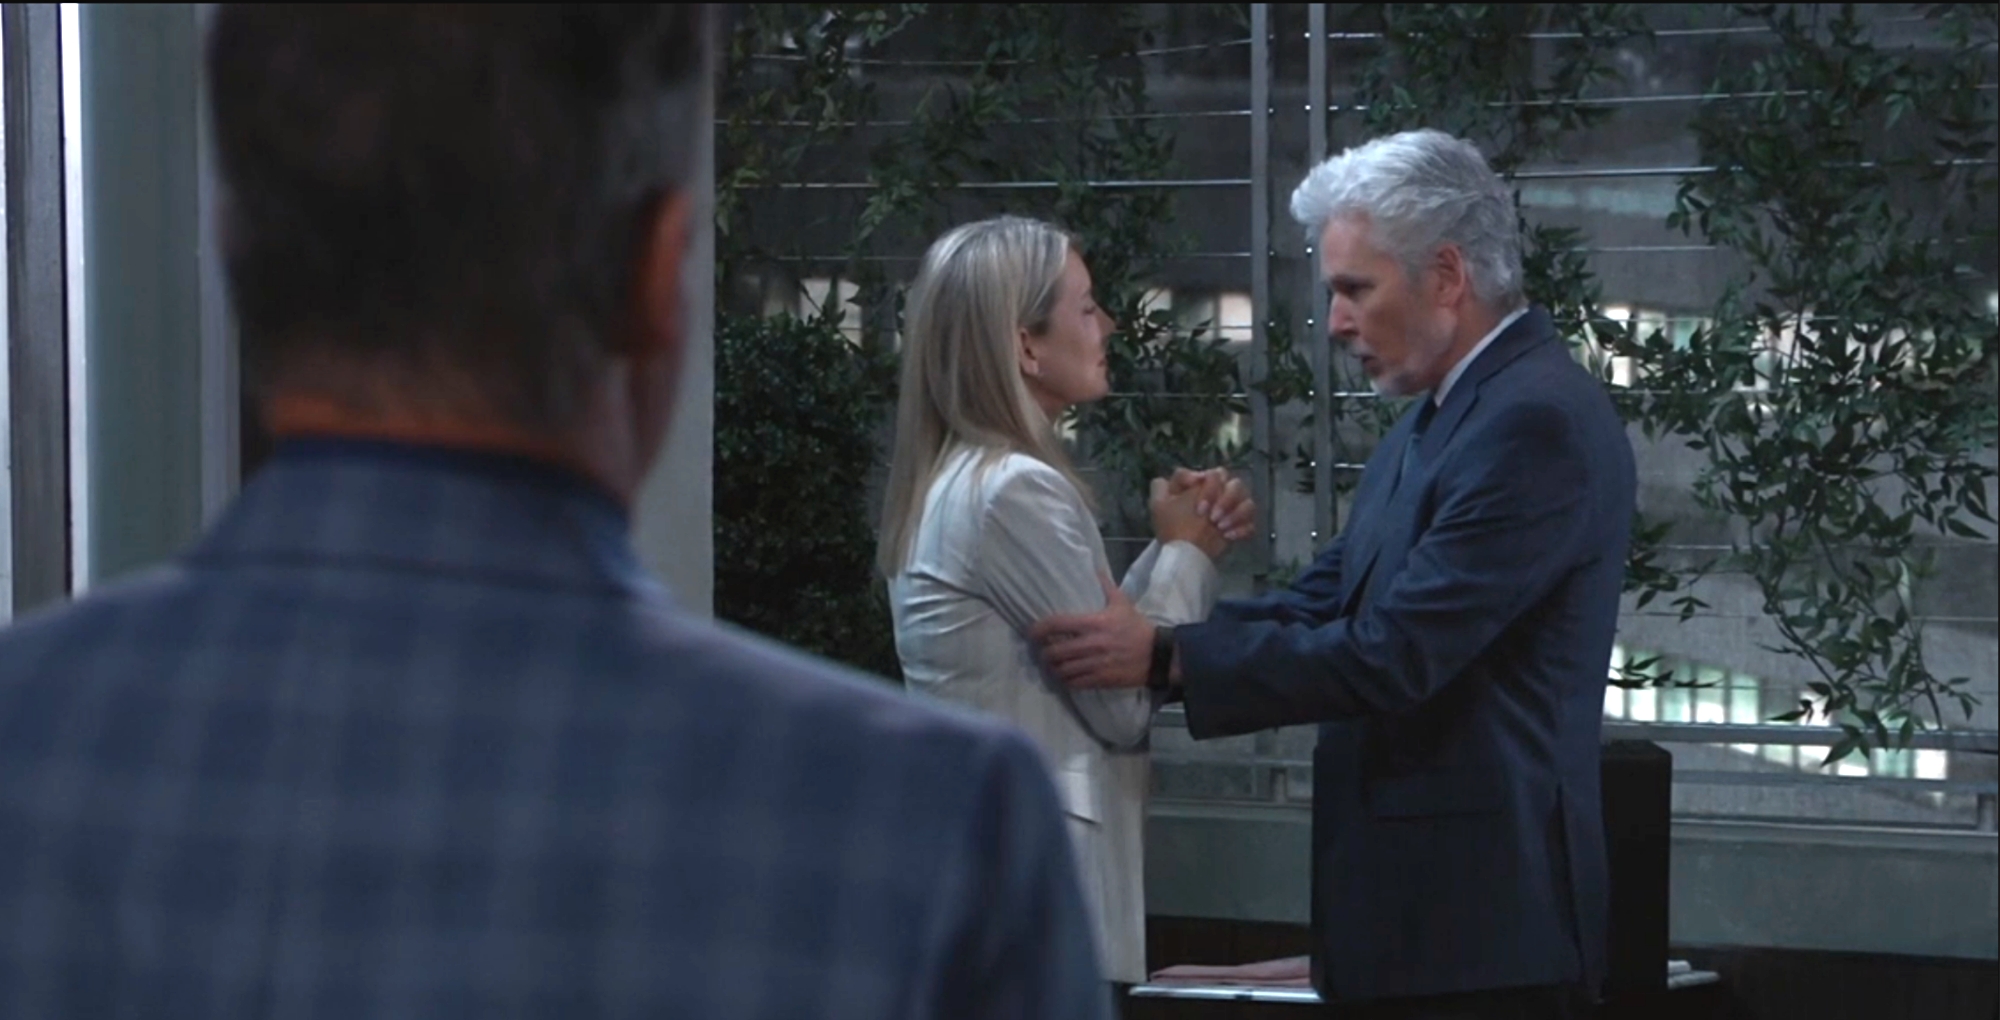 the general hospital recap for june 7 2023 has ned overhearing an important conversation between nina reeves and martin.